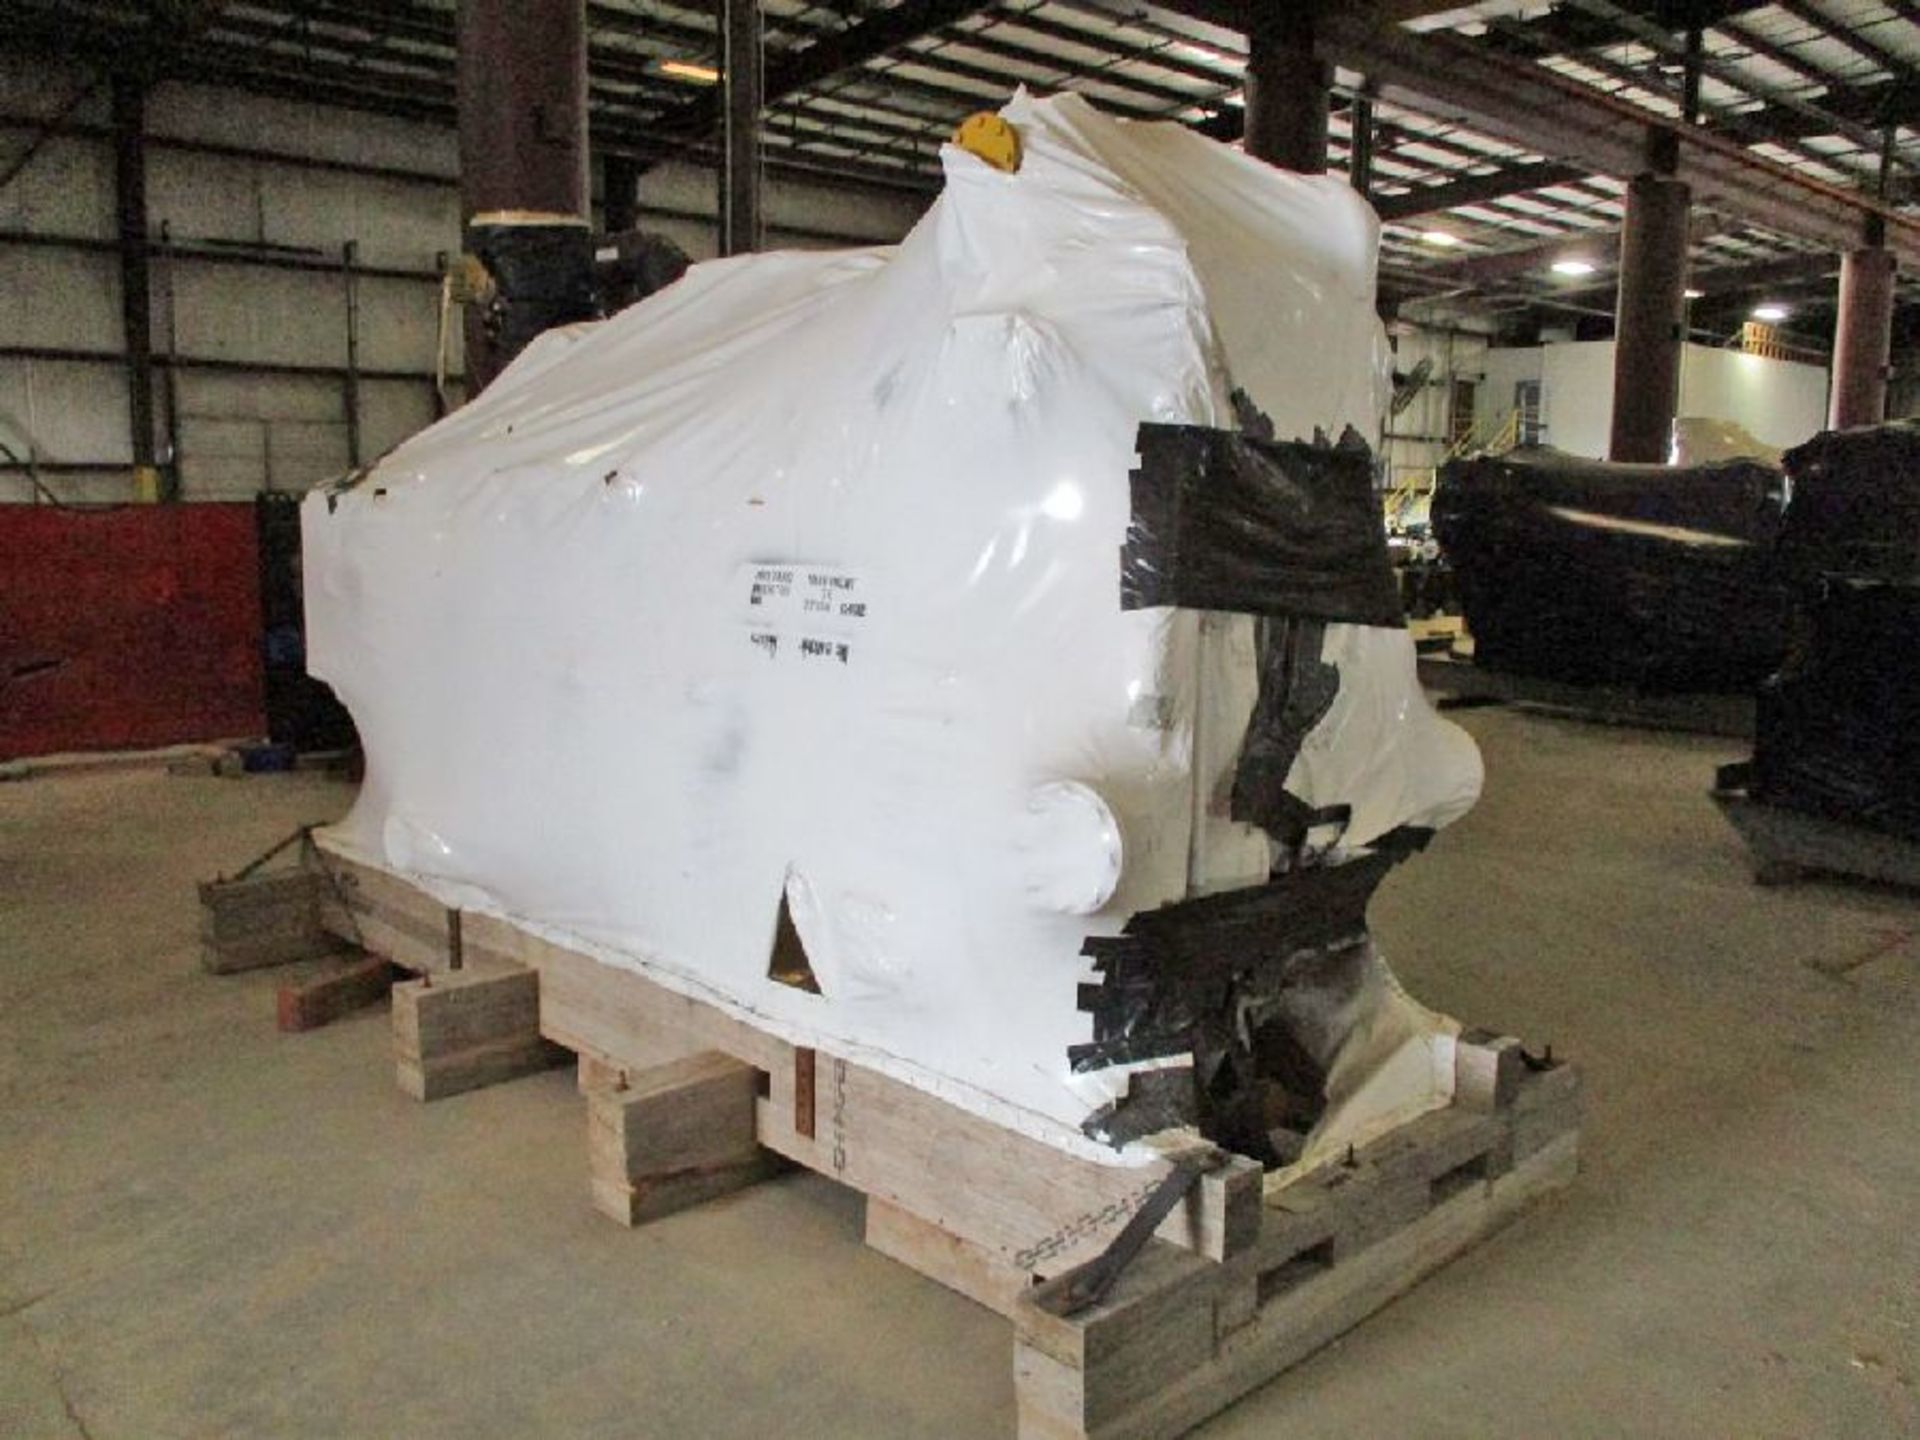 Caterpillar Model G3606 Unused 1875 HP / 1398 KW Natural Gas Compression Engine - Image 3 of 6